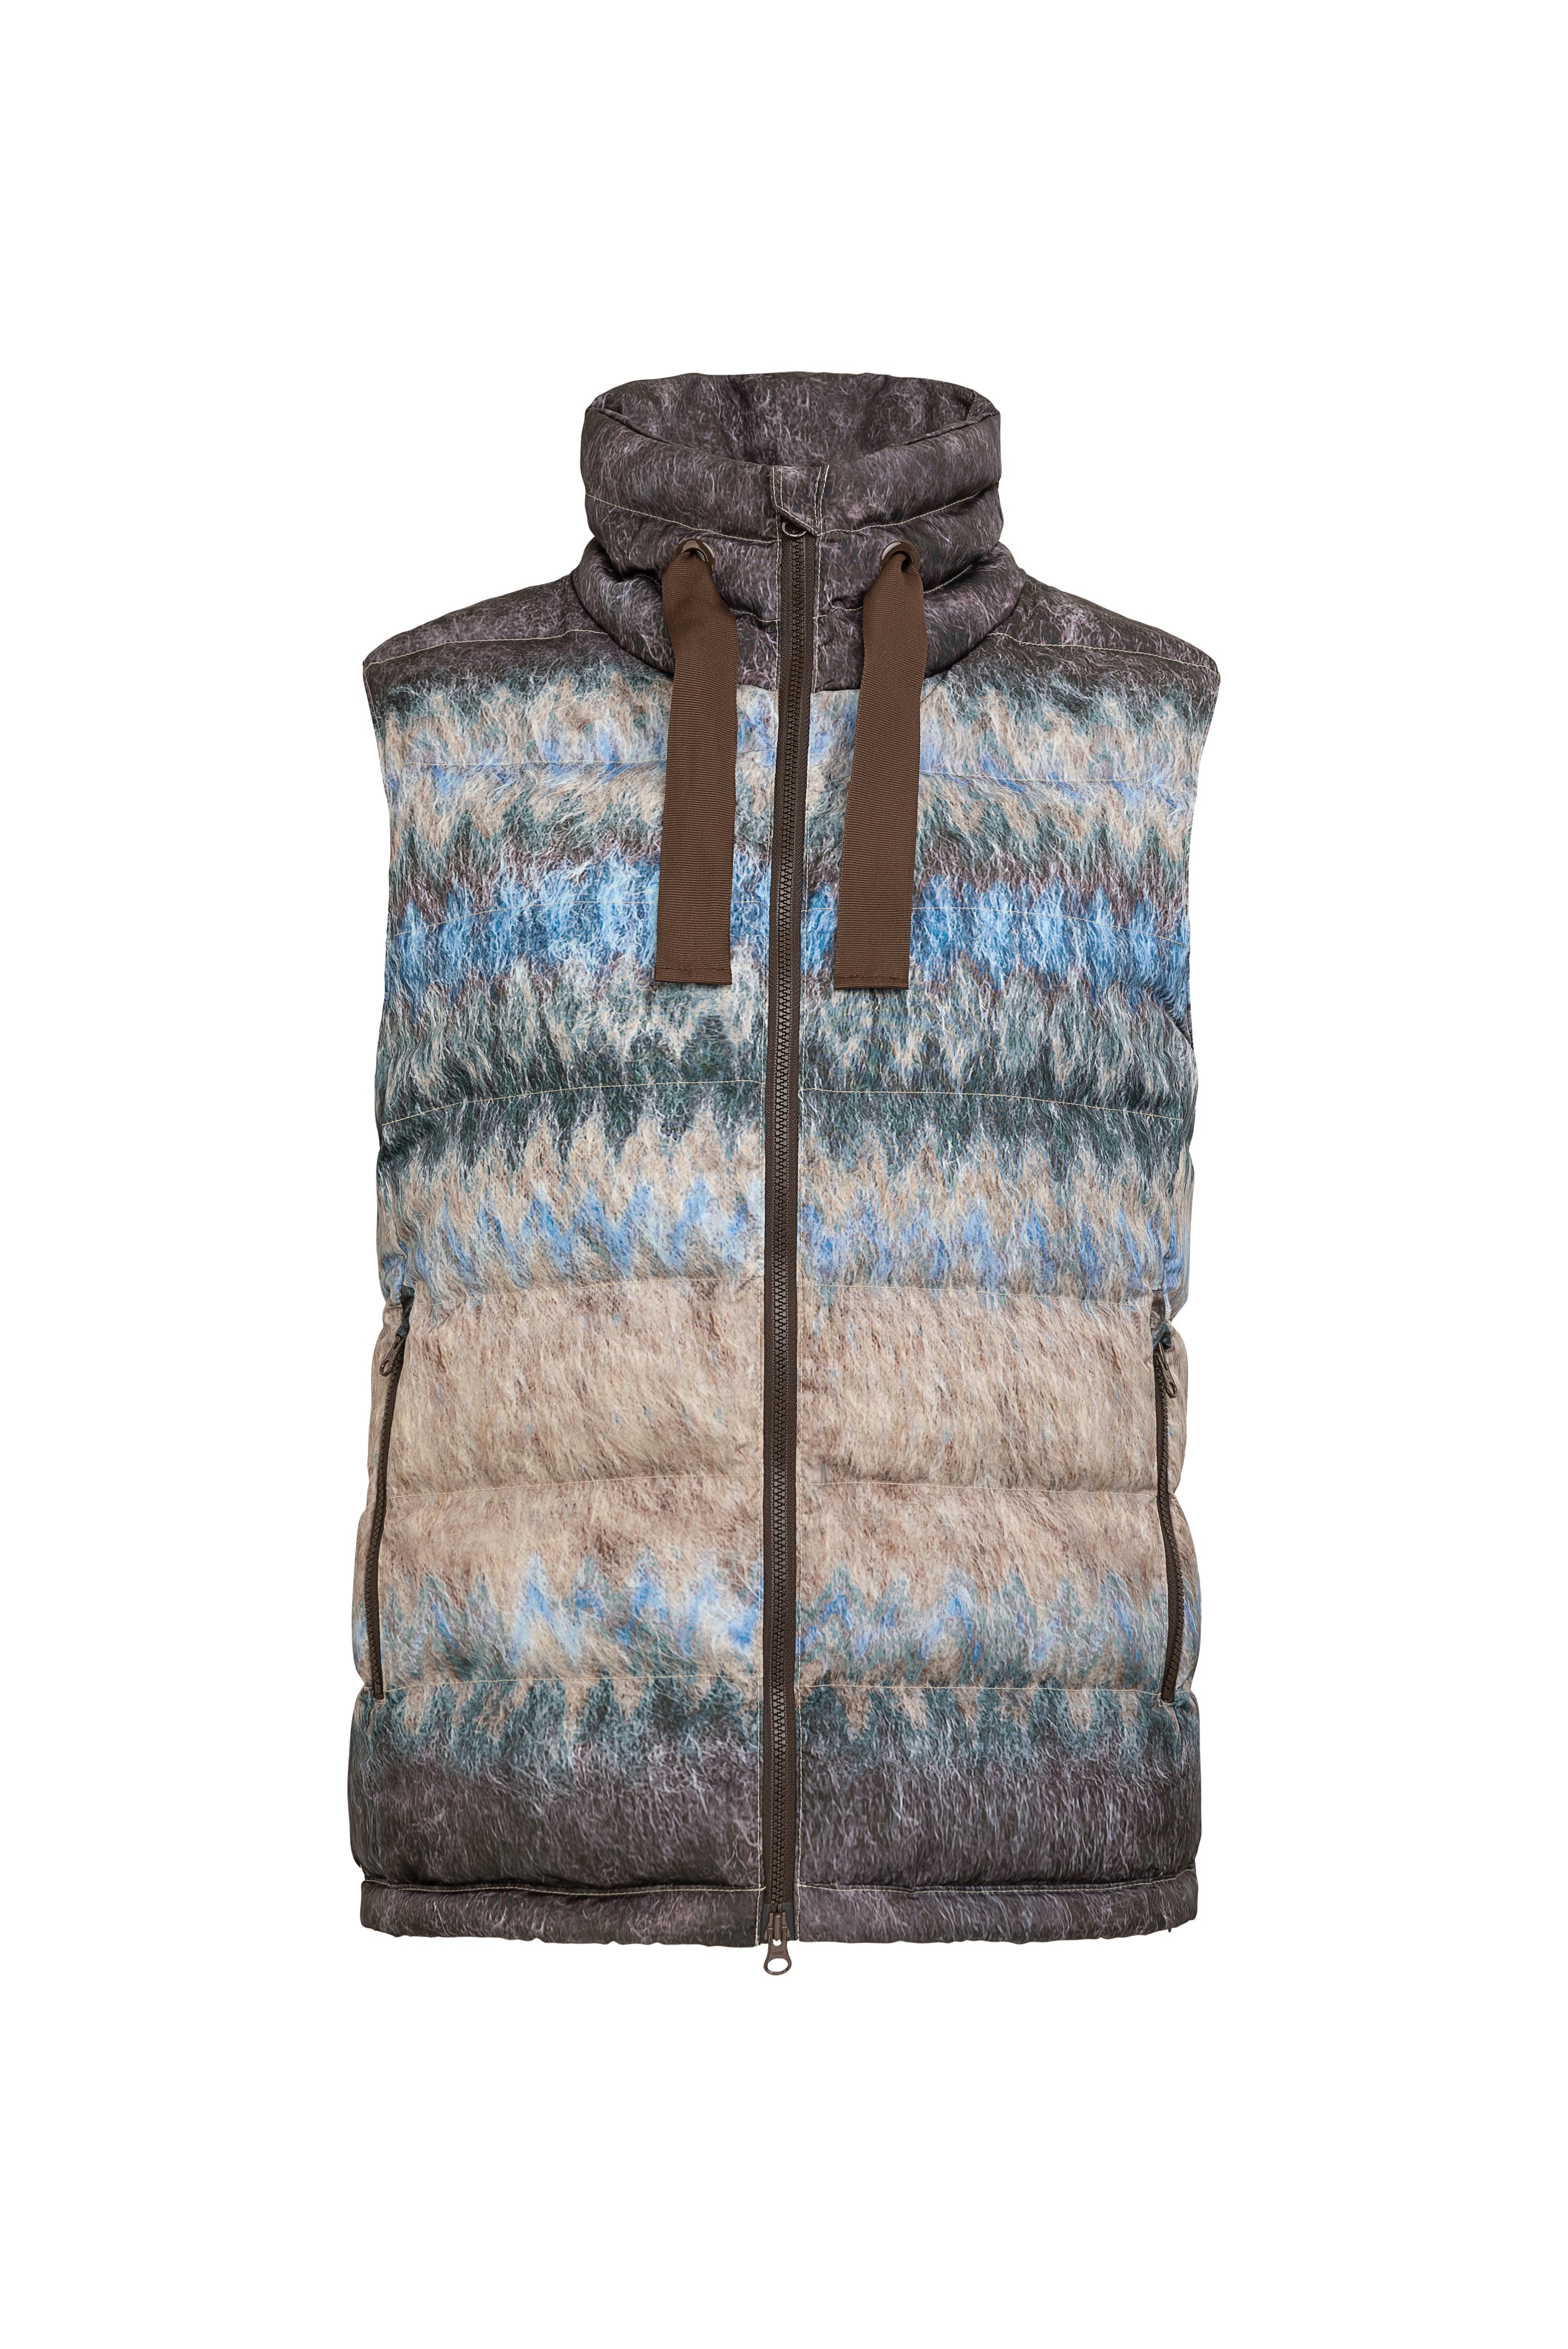 New Nordic quilted vest